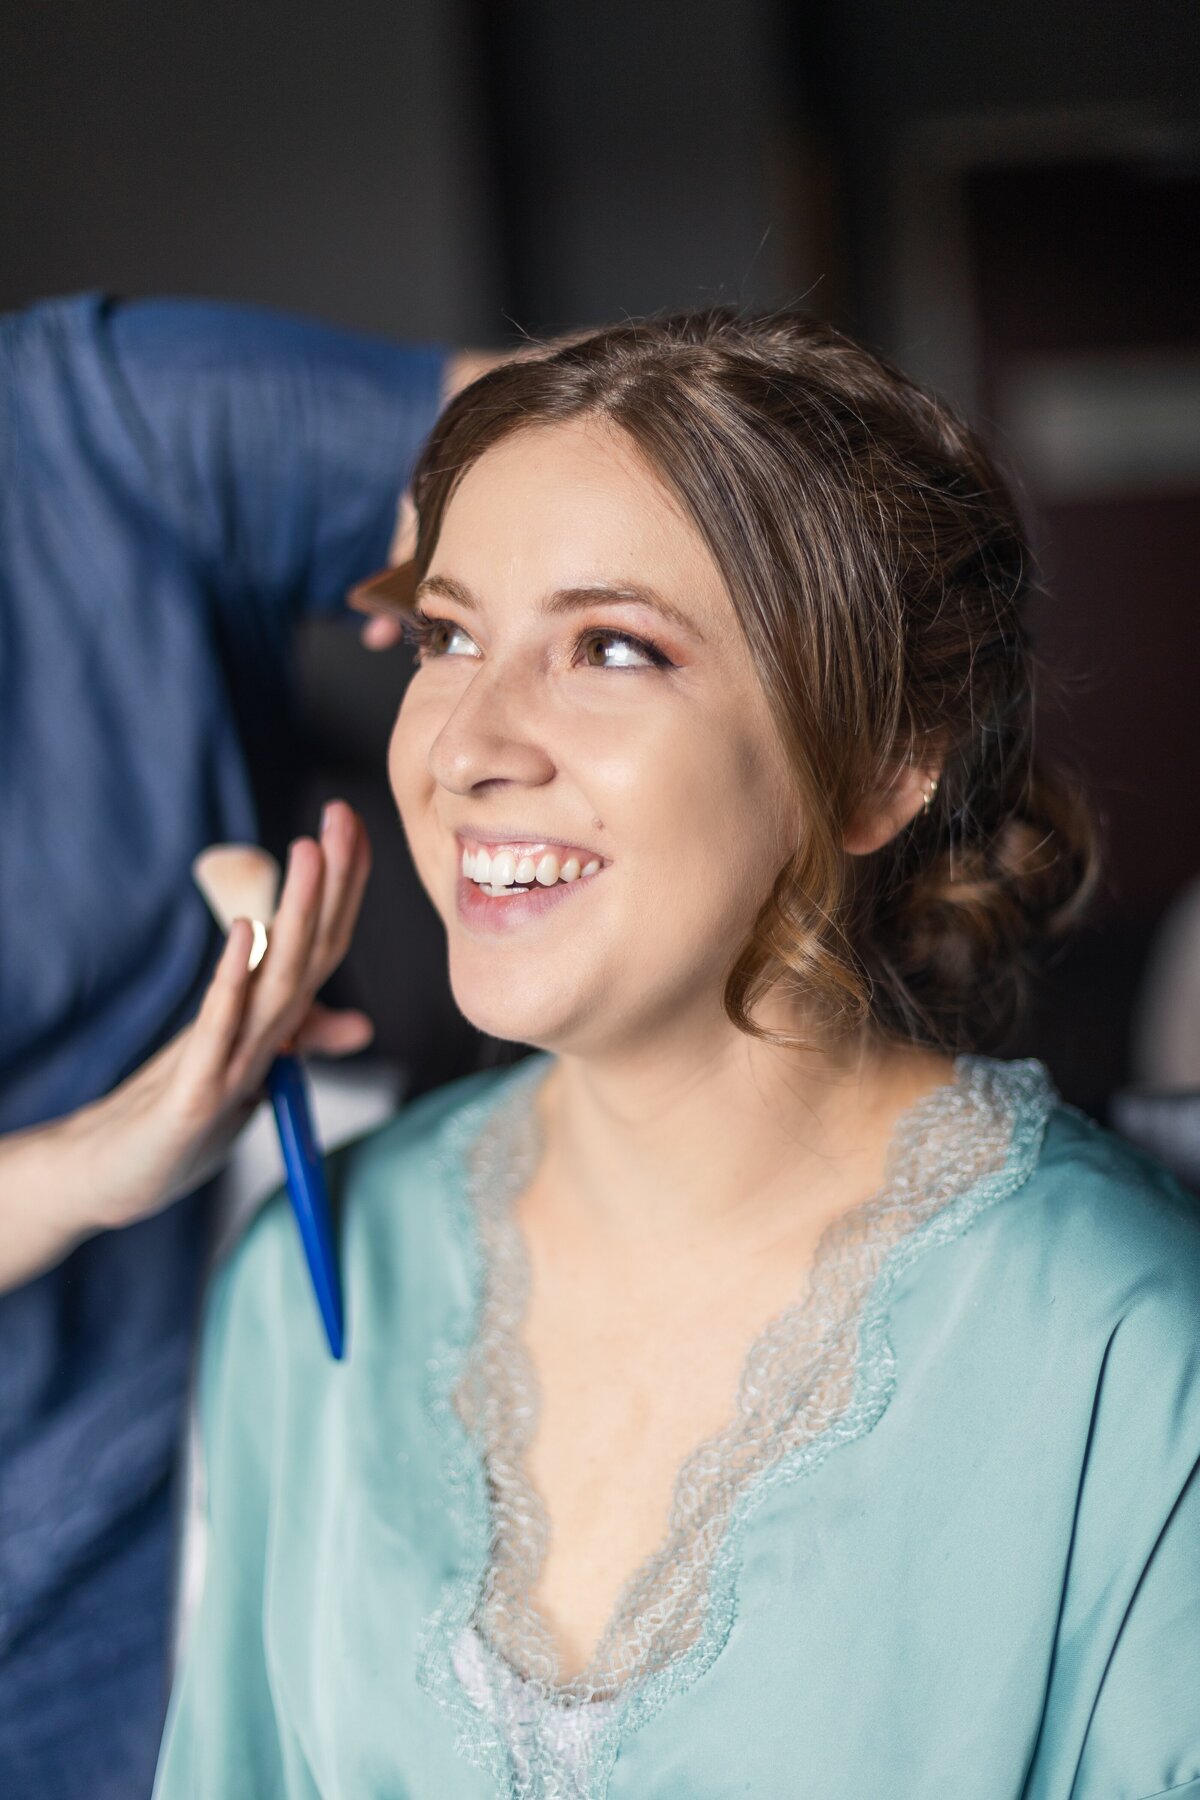 A girl in a blue robe with lace smiles as her makeup is being applied